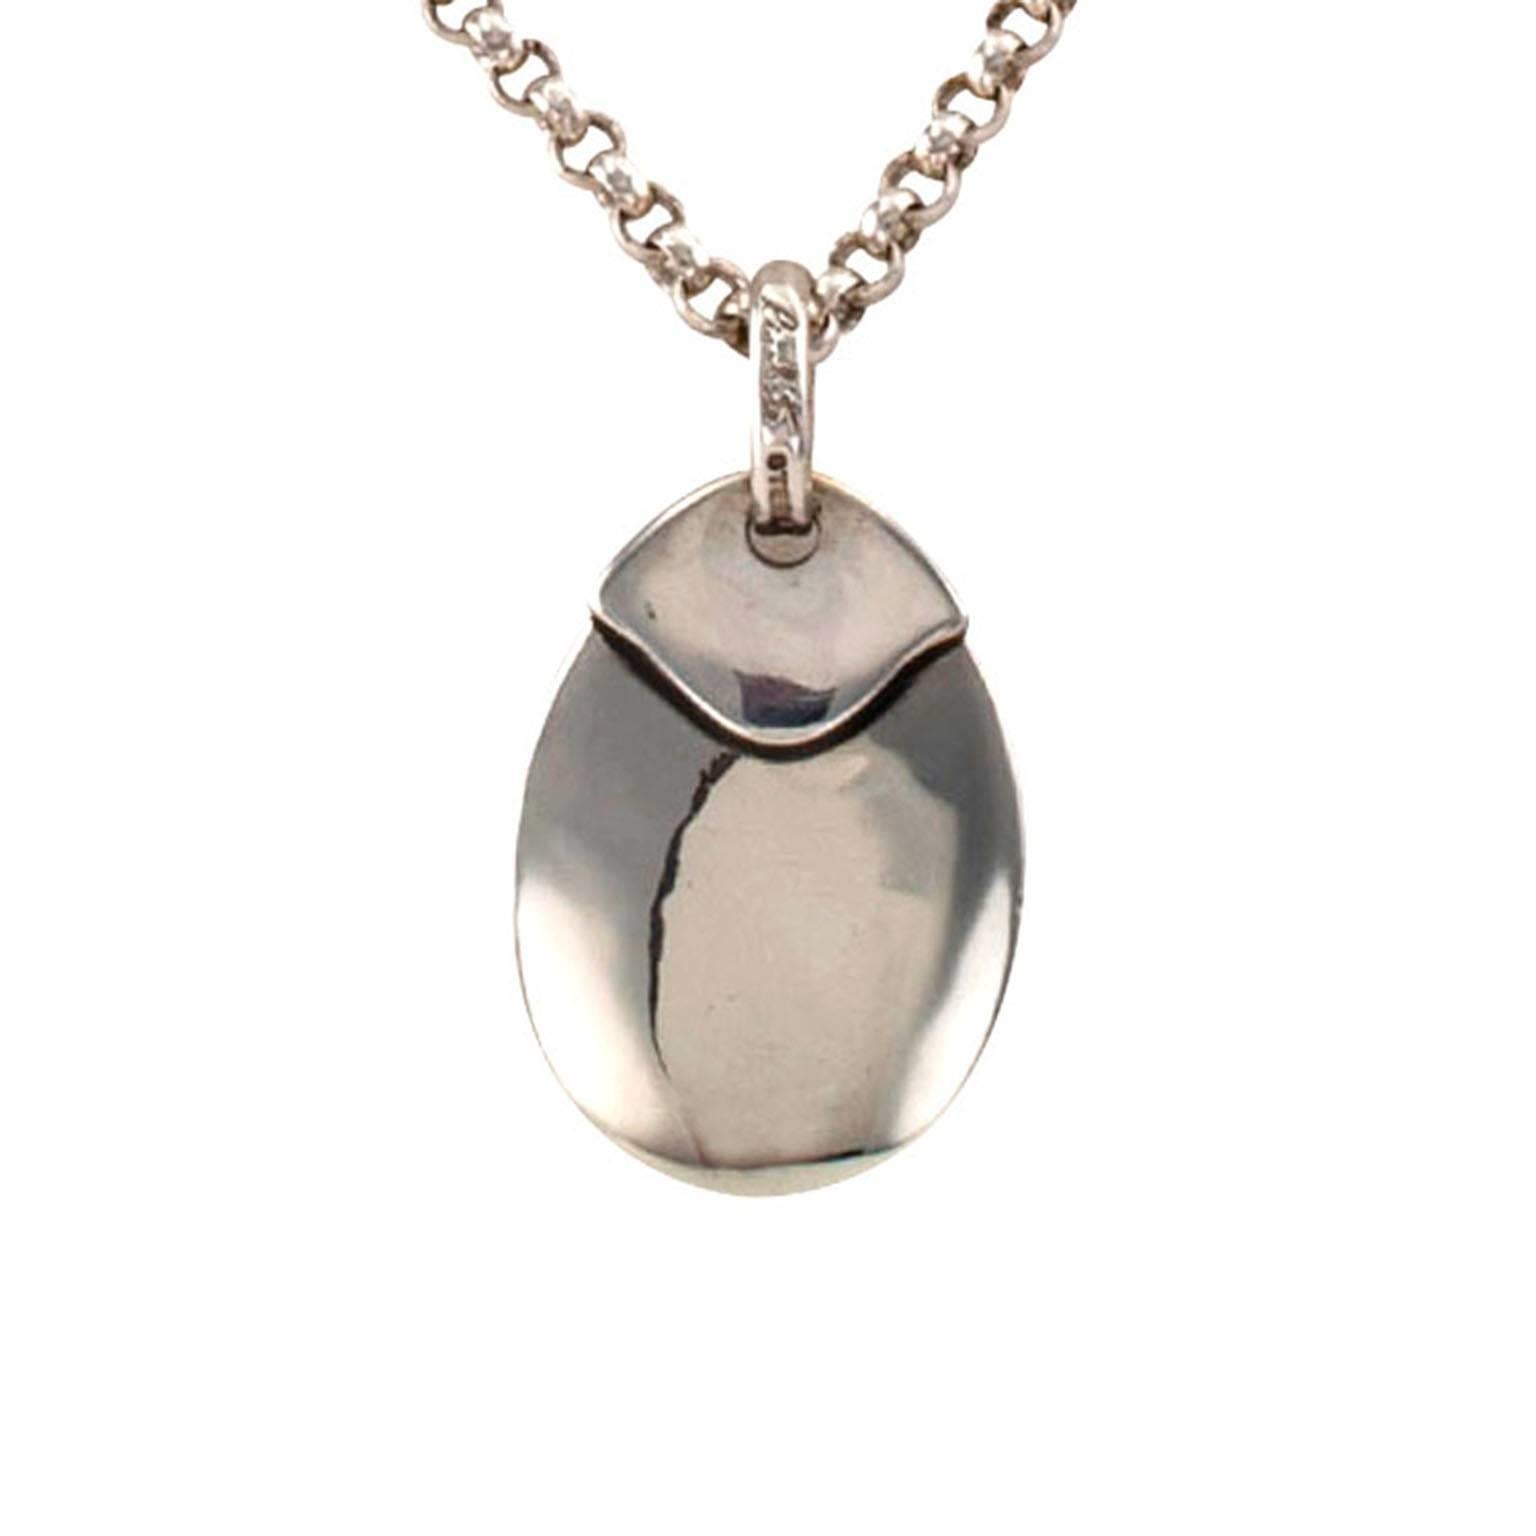 Rigoberto Sterling Silver Dog Tag Pendant

Suitable for engraving with geometric accents, the pendant 1 1/2" long and 7/8" wide, suspended from a sterling silver 4 mm 19" long rolo chain.  Signed Rigoberto, made in the USA, crafted